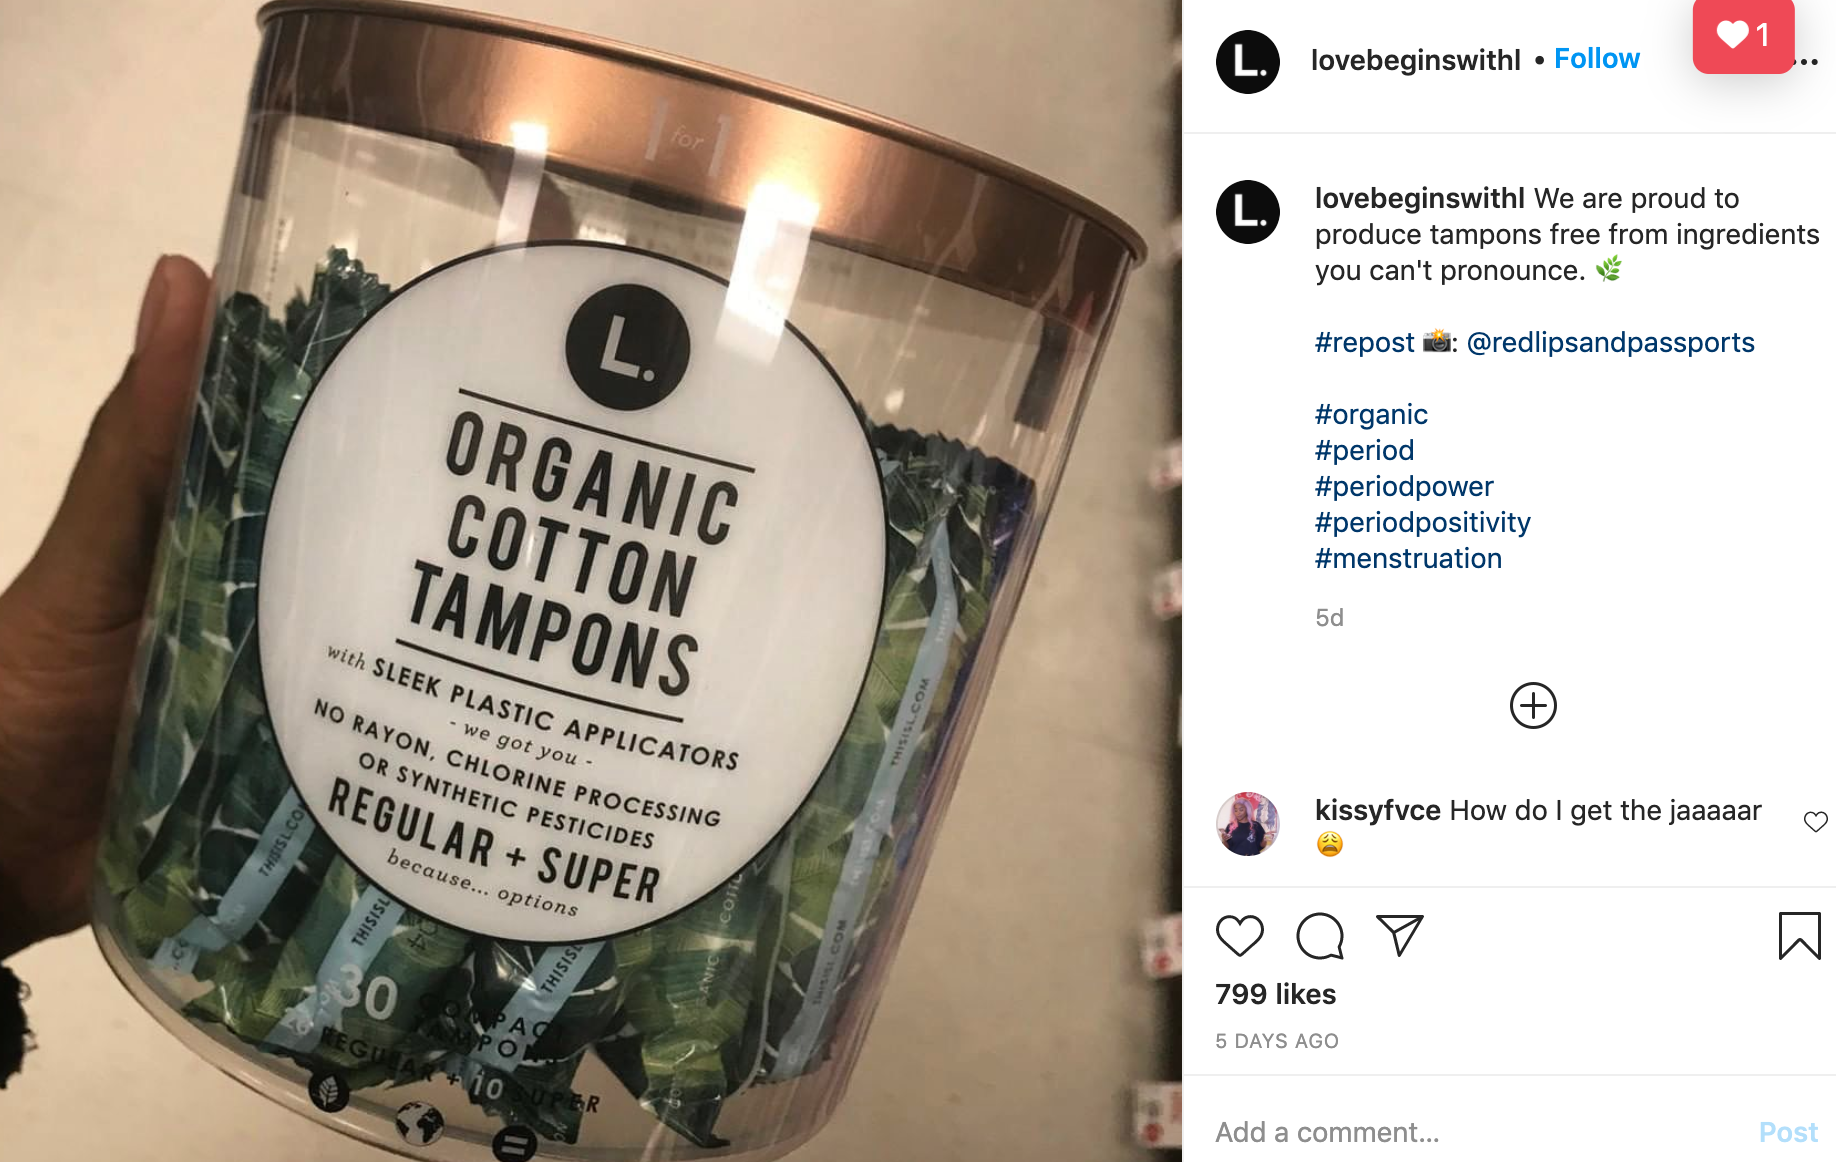 Instagram marketing for health and wellness brands